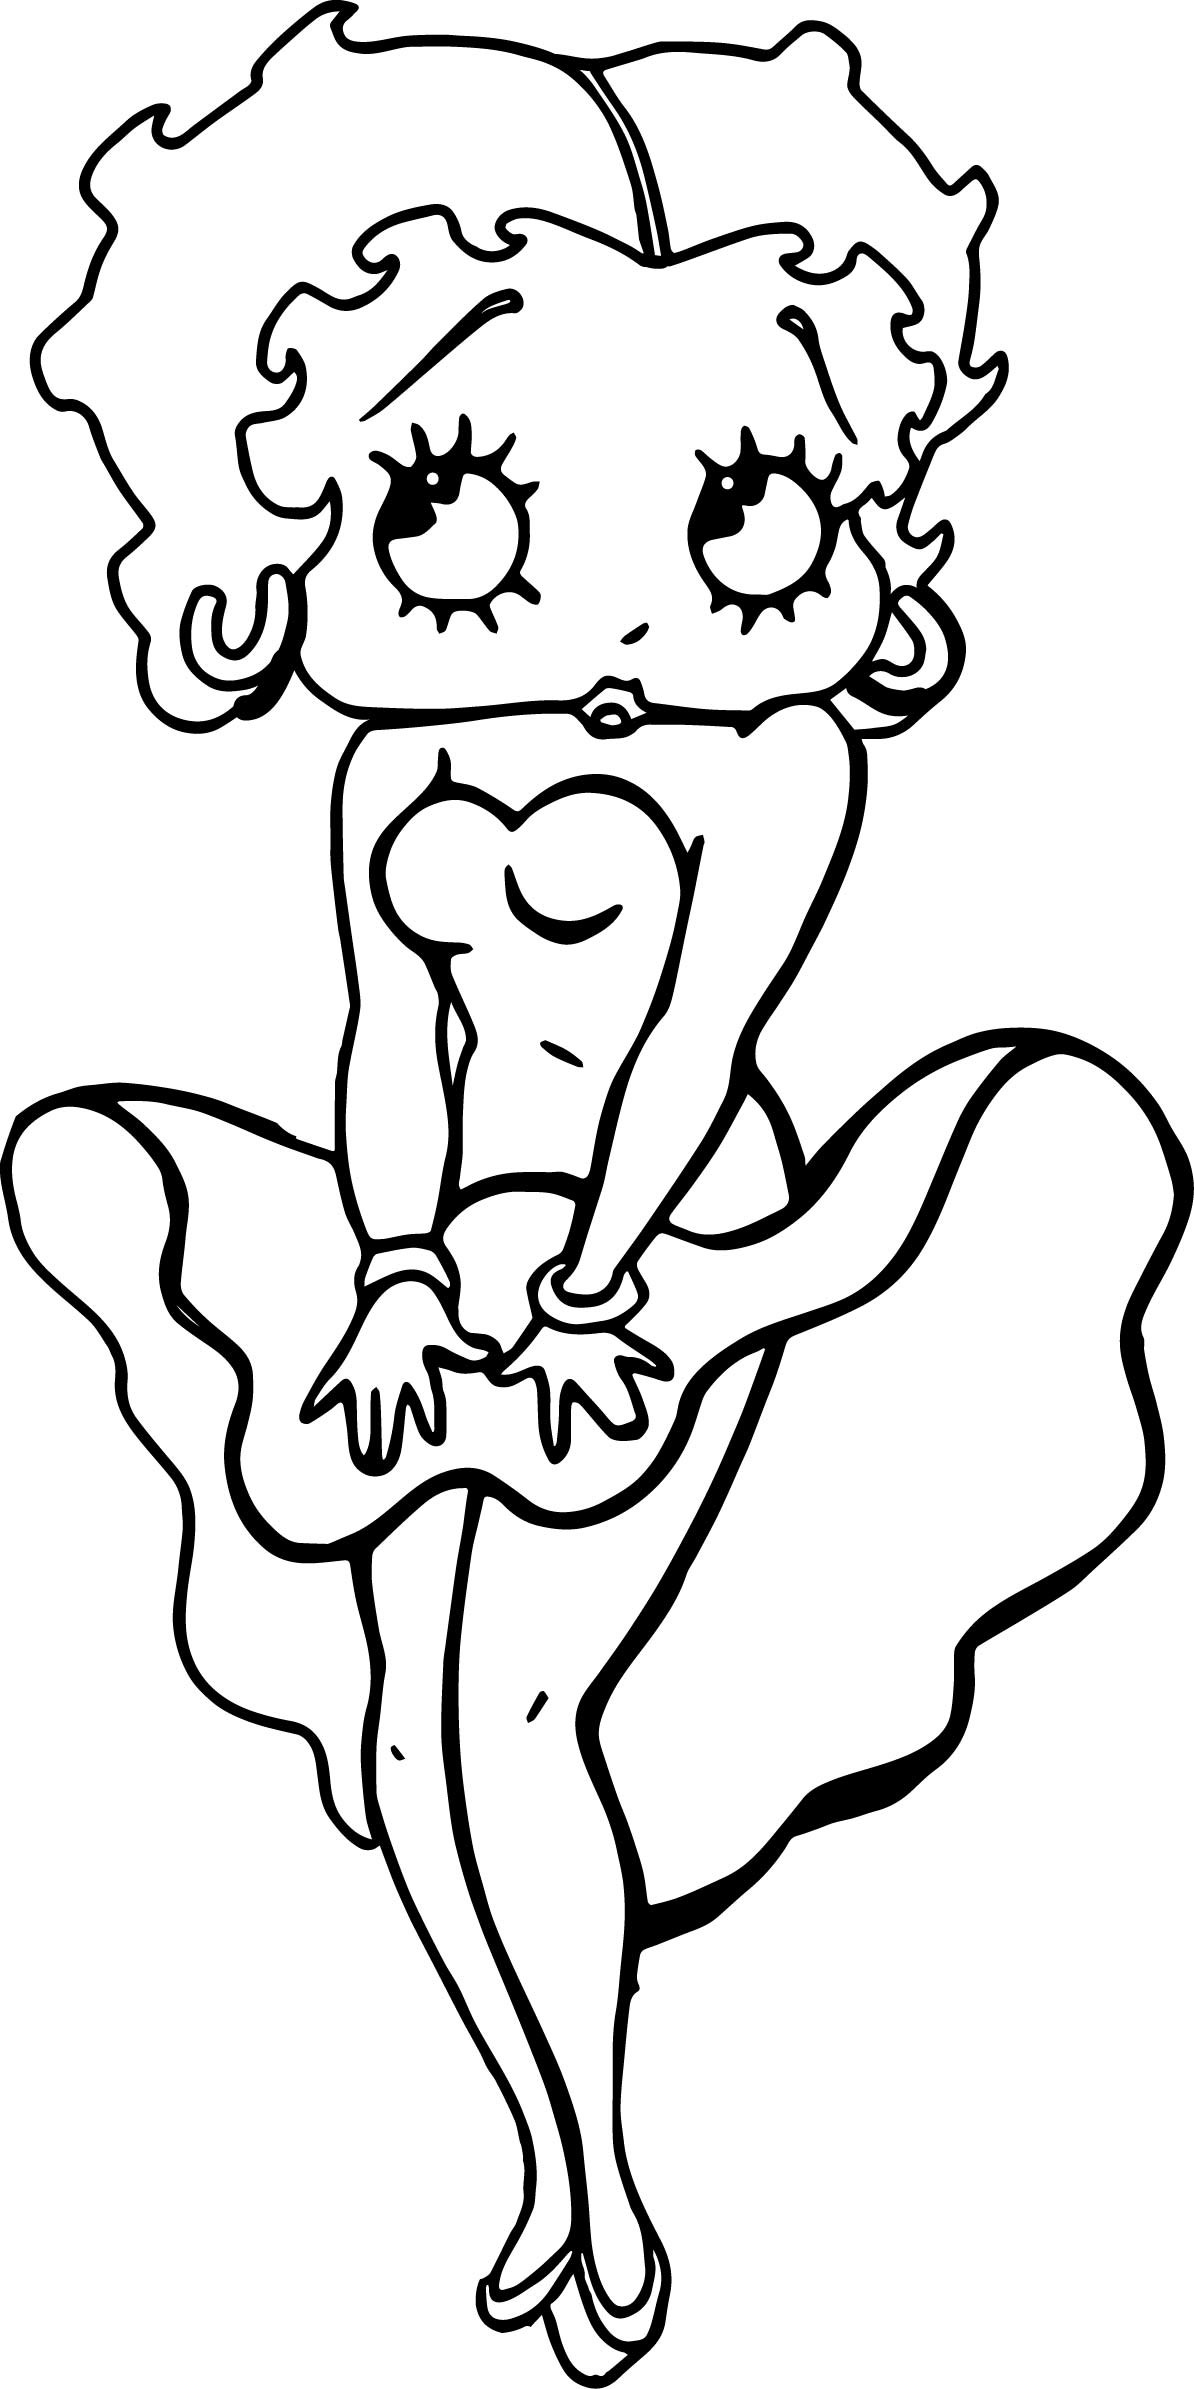 betty-boop-coloring-pages-birthday-present